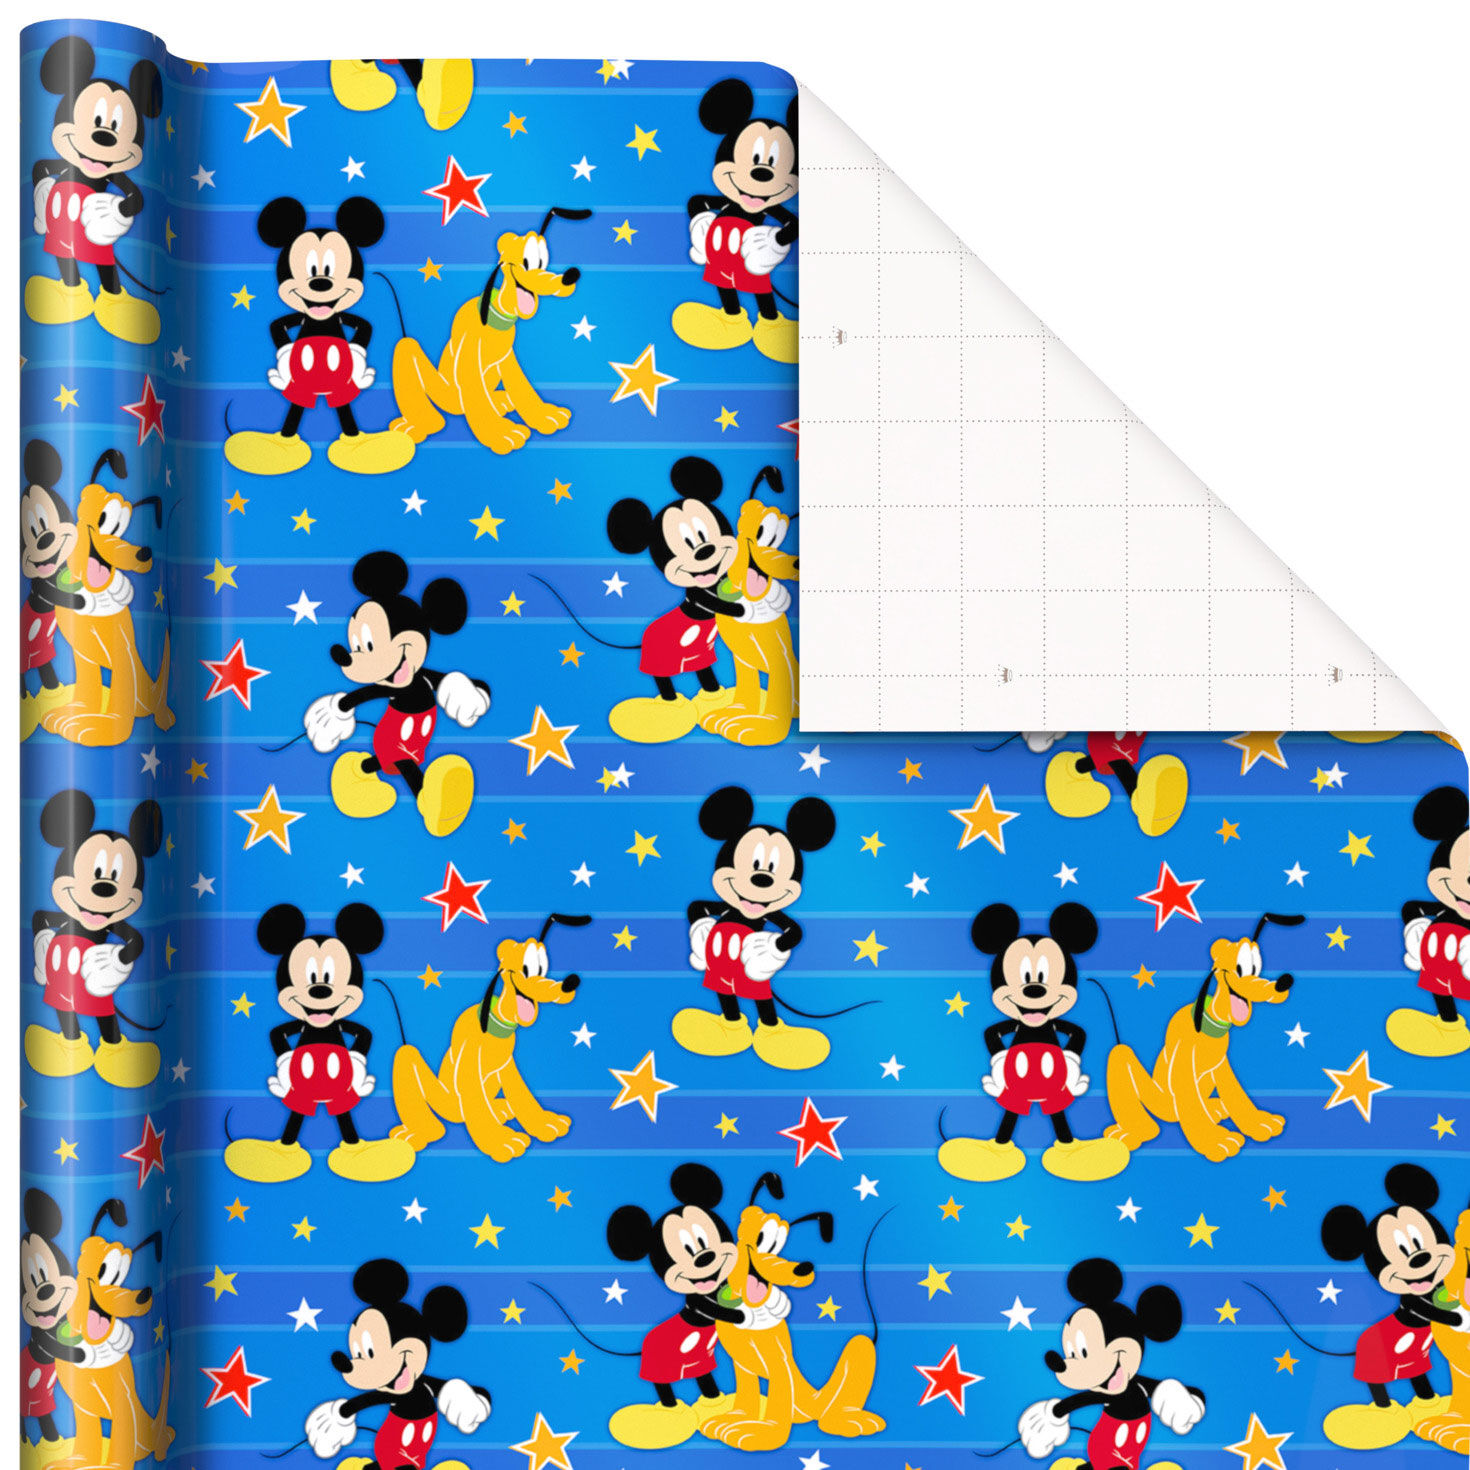 https://www.hallmark.com/dw/image/v2/AALB_PRD/on/demandware.static/-/Sites-hallmark-master/default/dw3dad6027/images/finished-goods/products/499EJR6354/Disney-Mickey-Mouse-and-Pluto-on-Blue-Wrapping-Paper_499EJR6354_01.jpg?sfrm=jpg